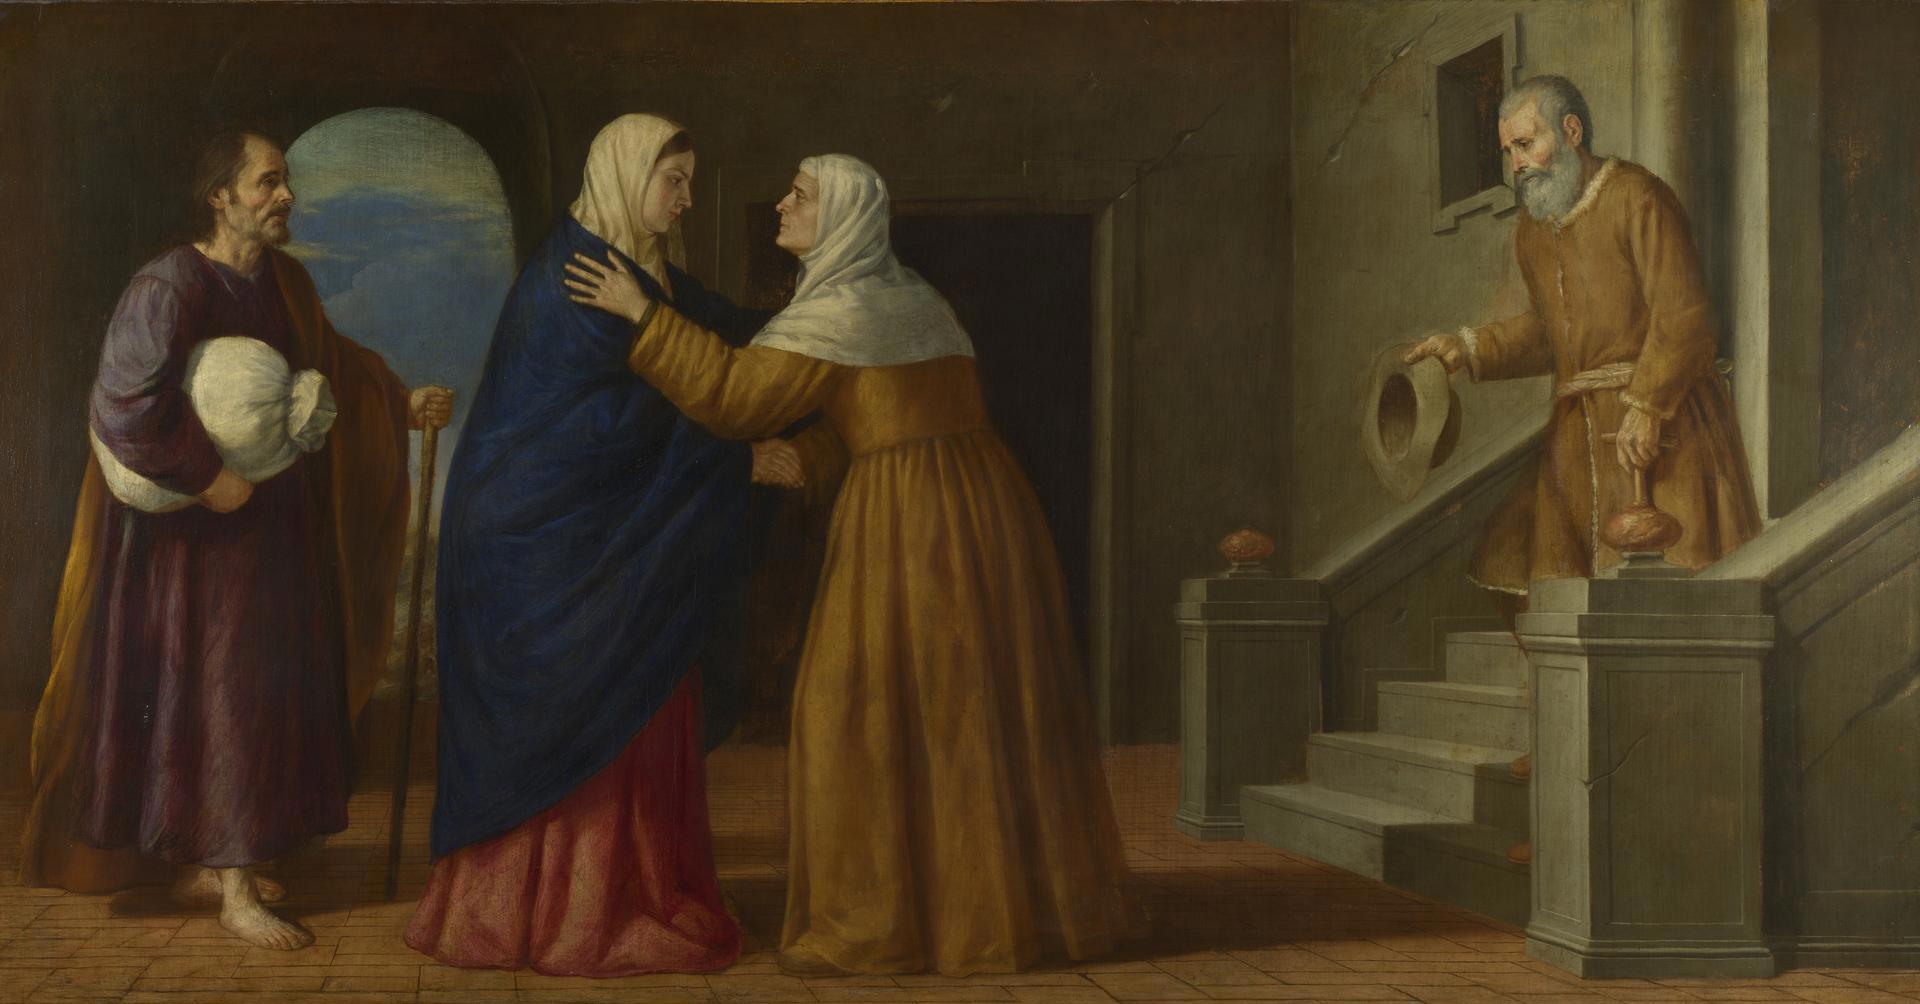 The Visitation by French or North Italian